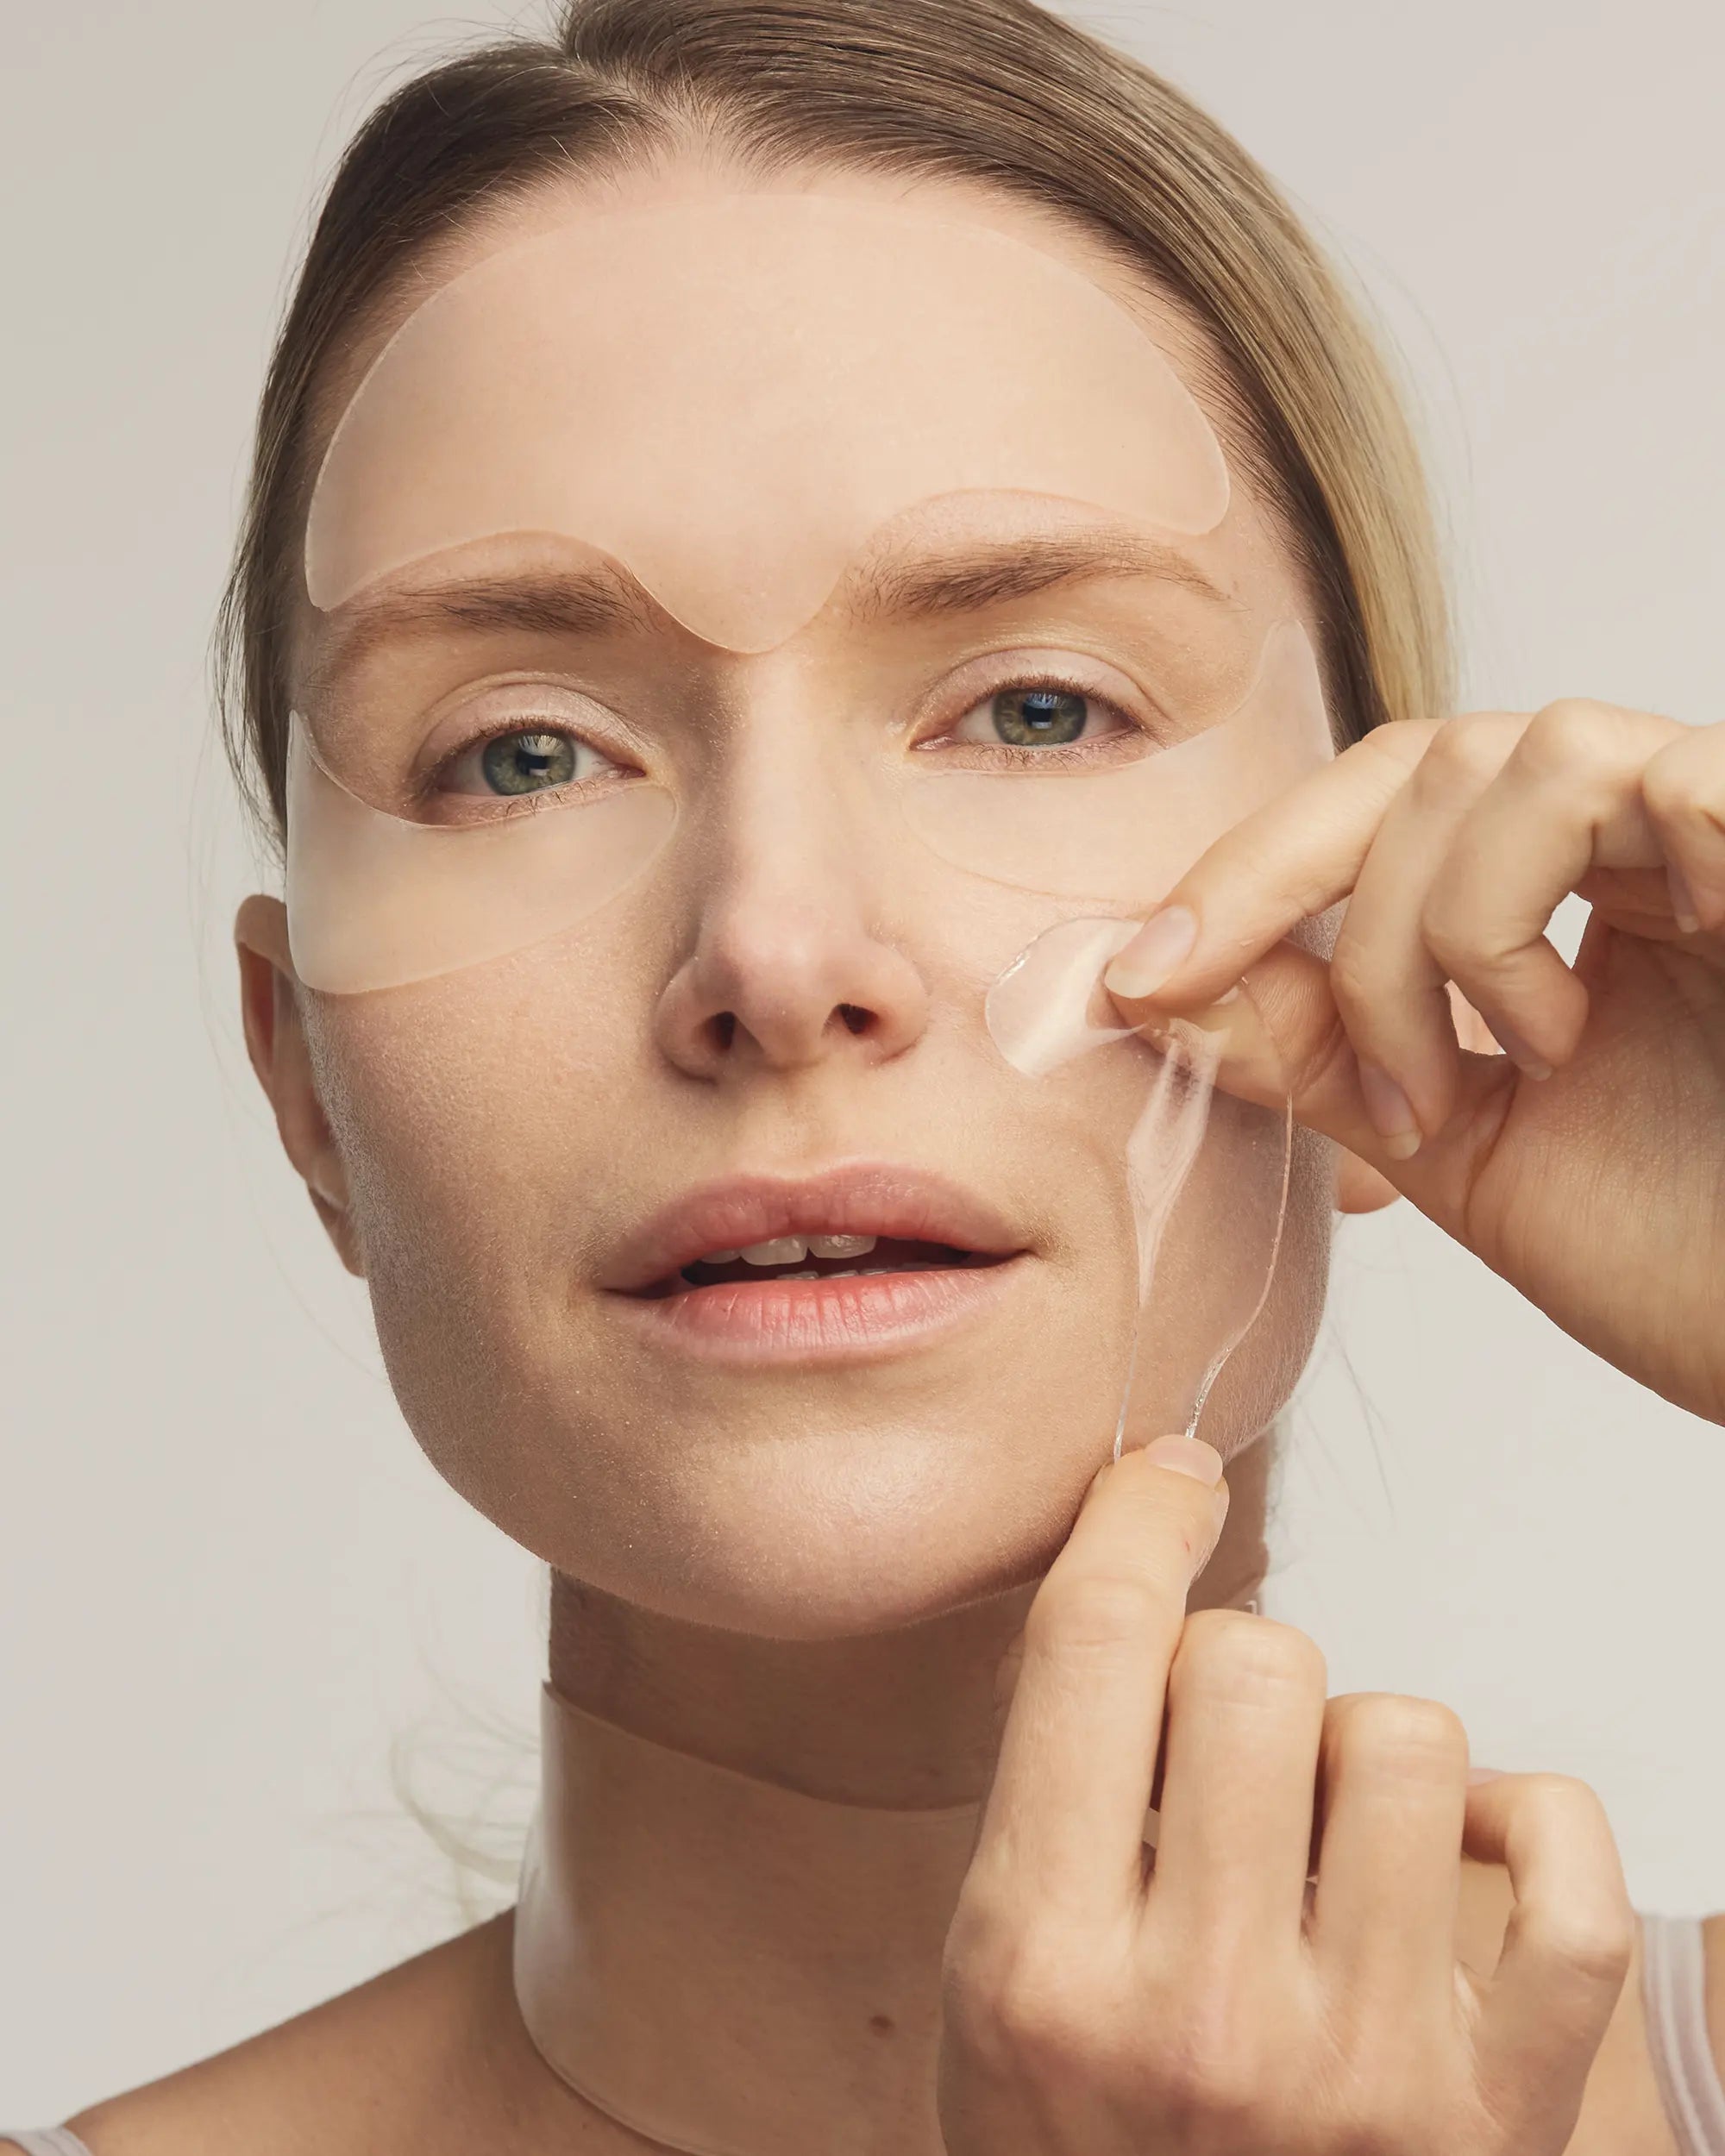 STEP-BY-STEP GUIDE TO USING SILICONE ANTI-WRINKLE FACE PATCHES